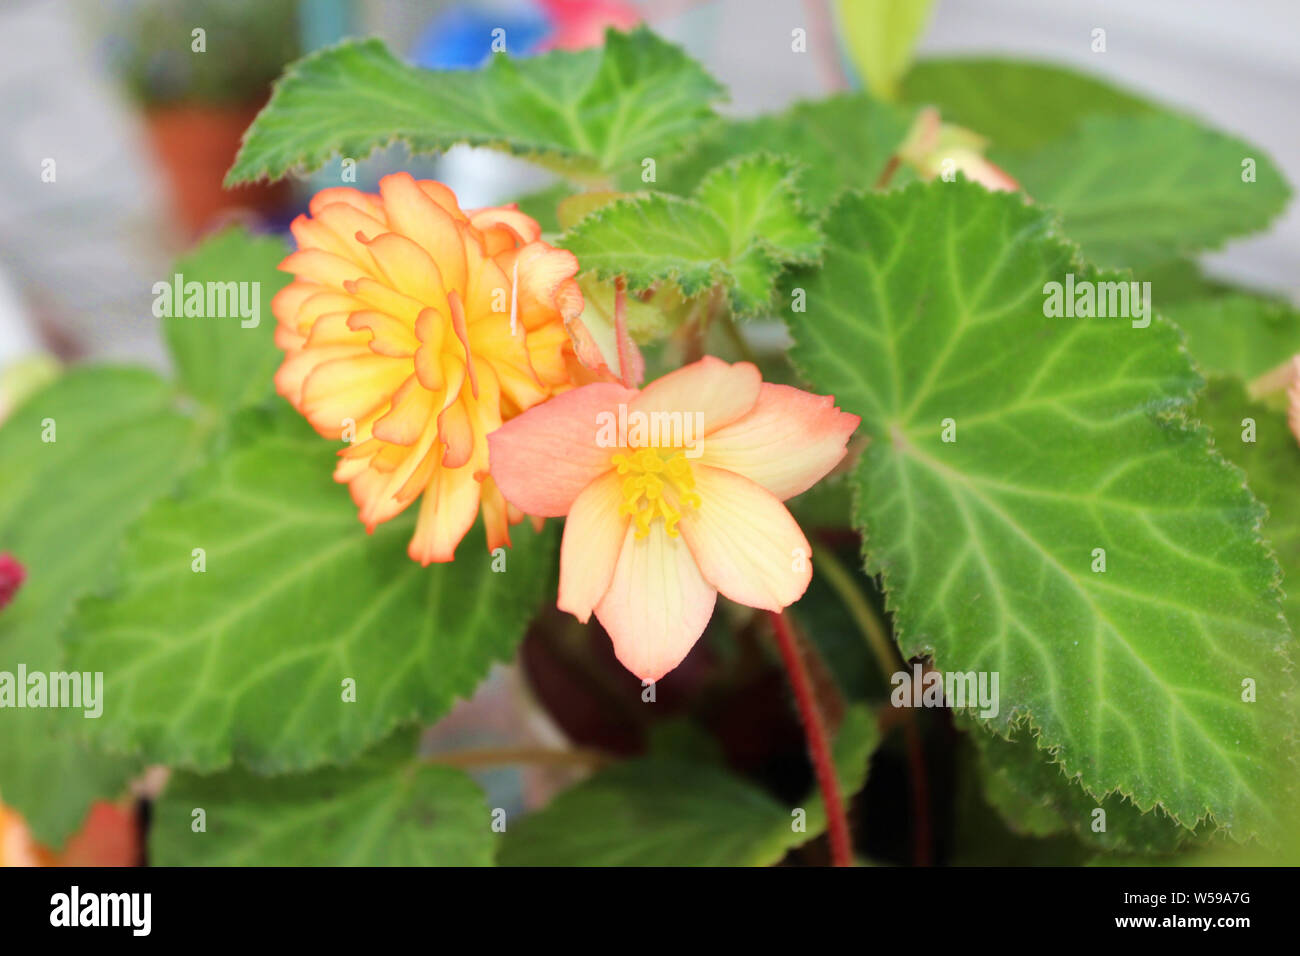 Close up of two blooming Golden Picotee Tuberous Begonia flowers with a blurred background Stock Photo